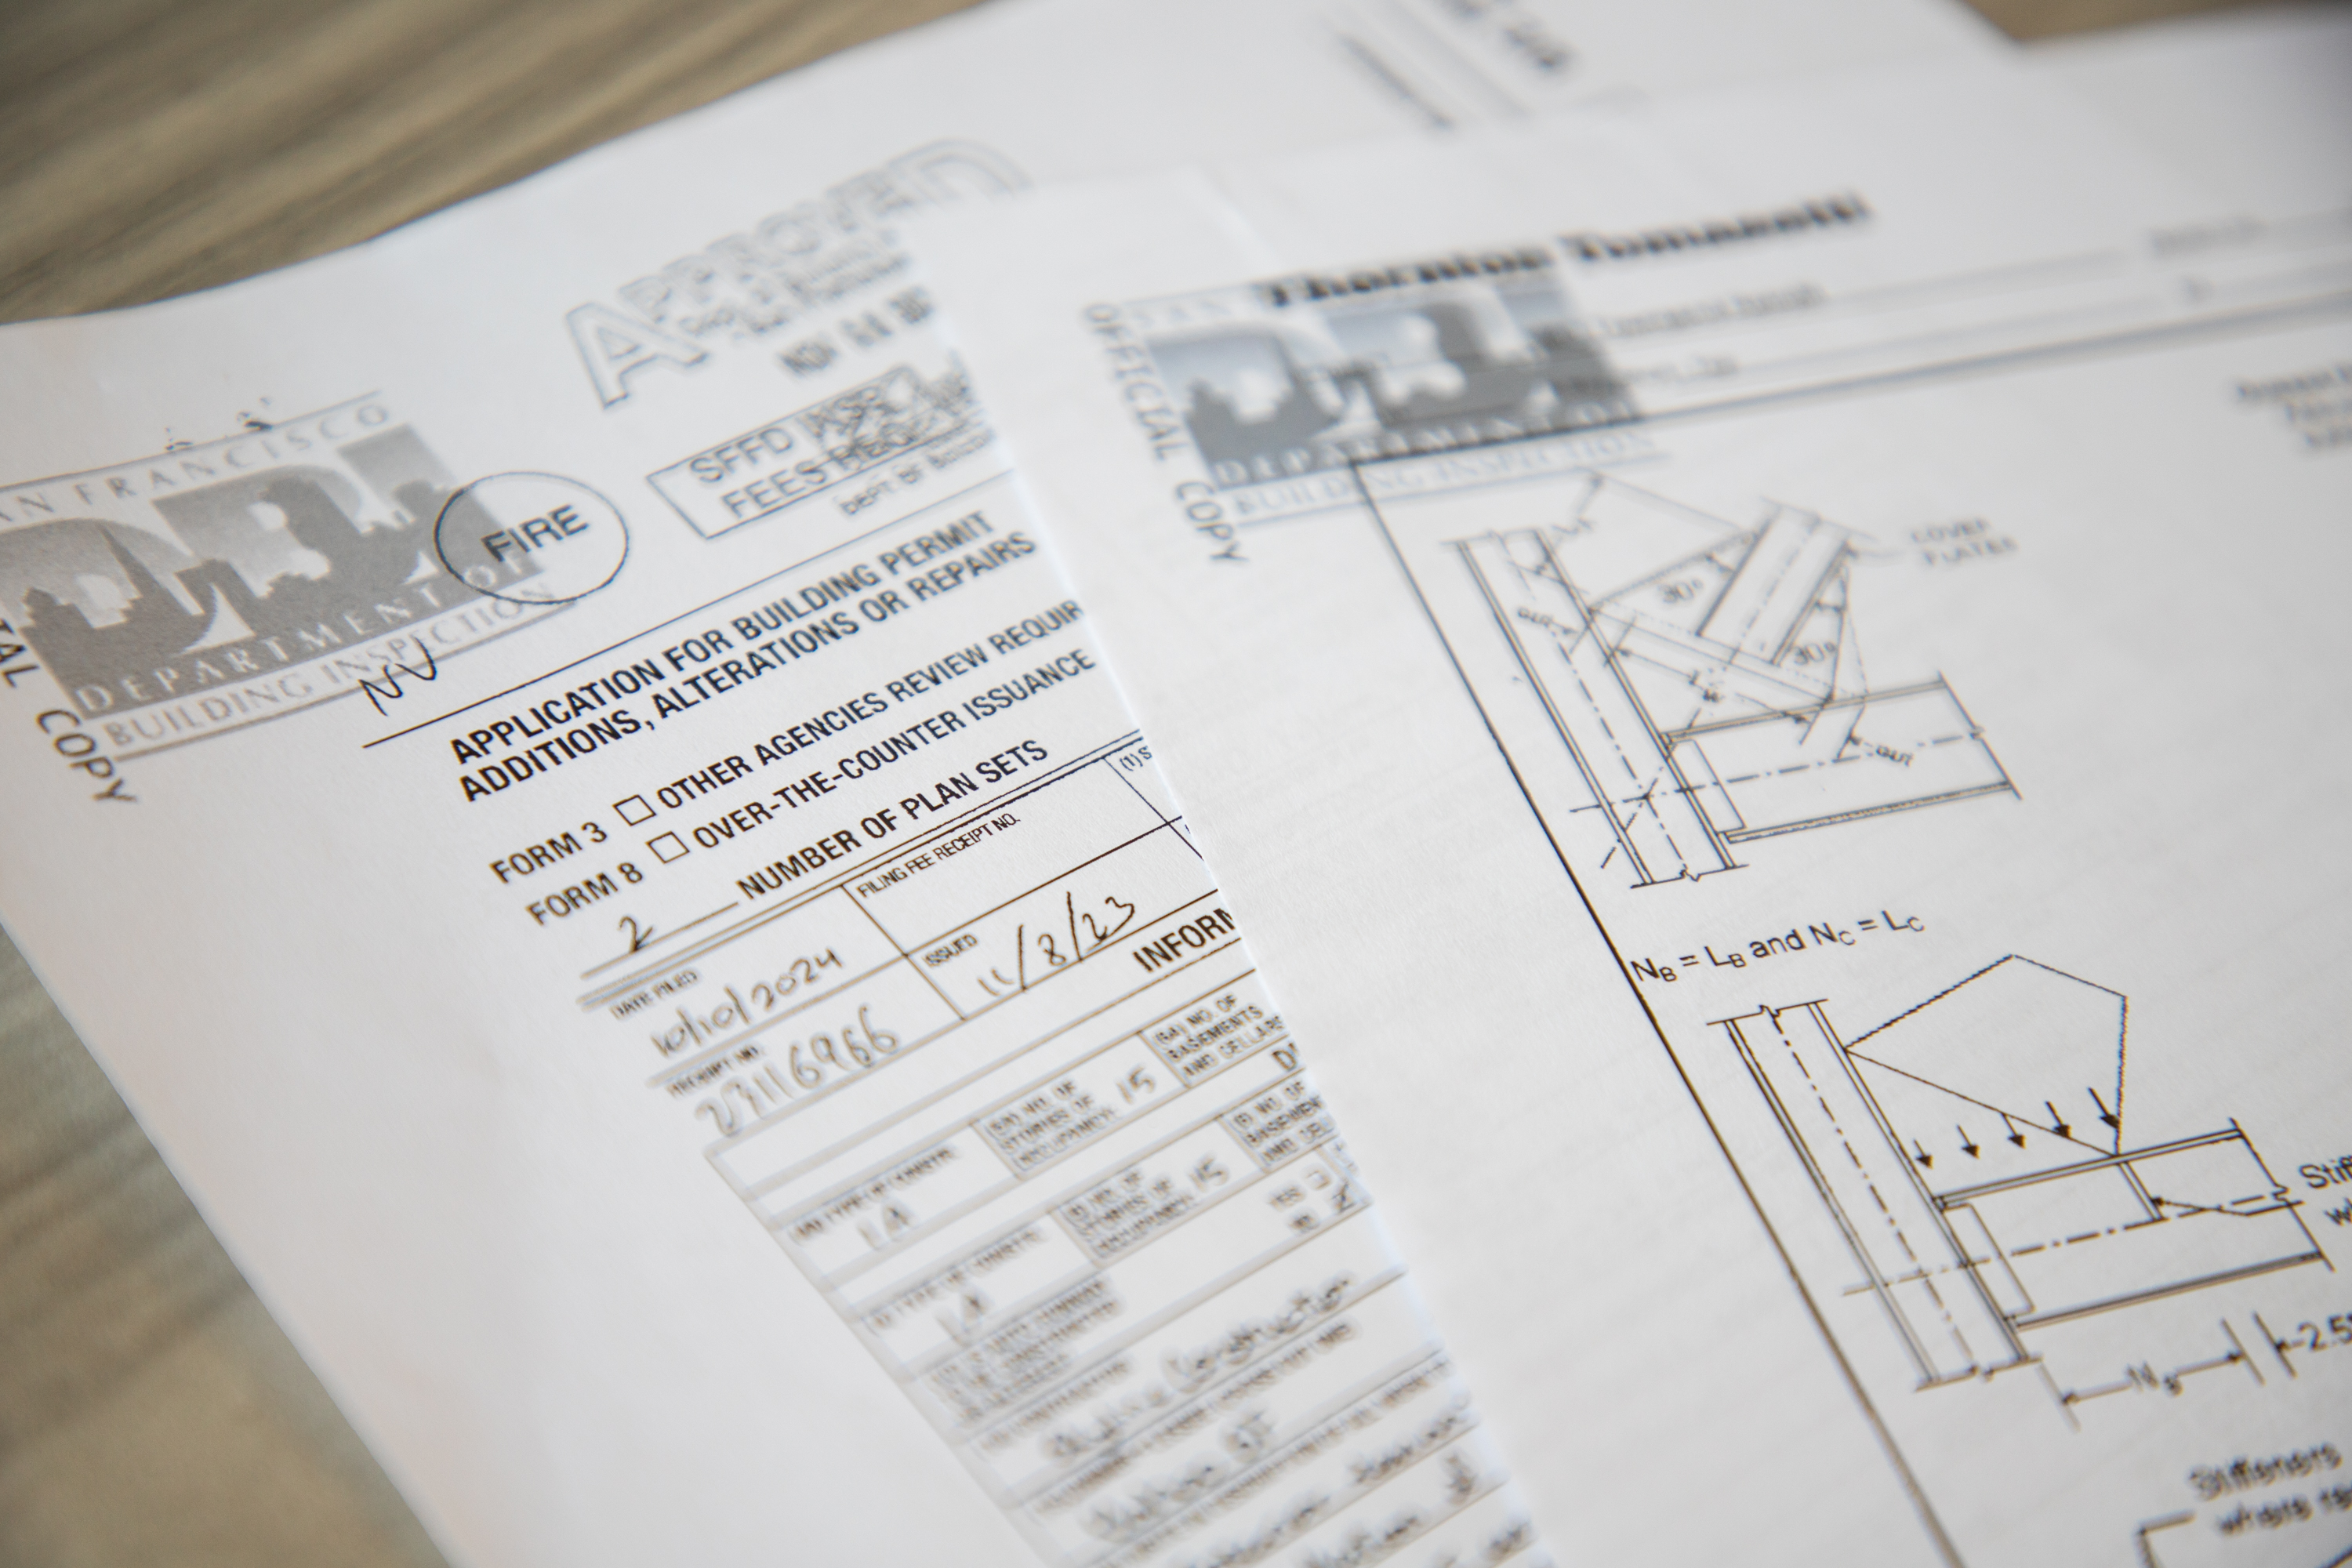 The image shows architectural blueprints and a building permit application form.